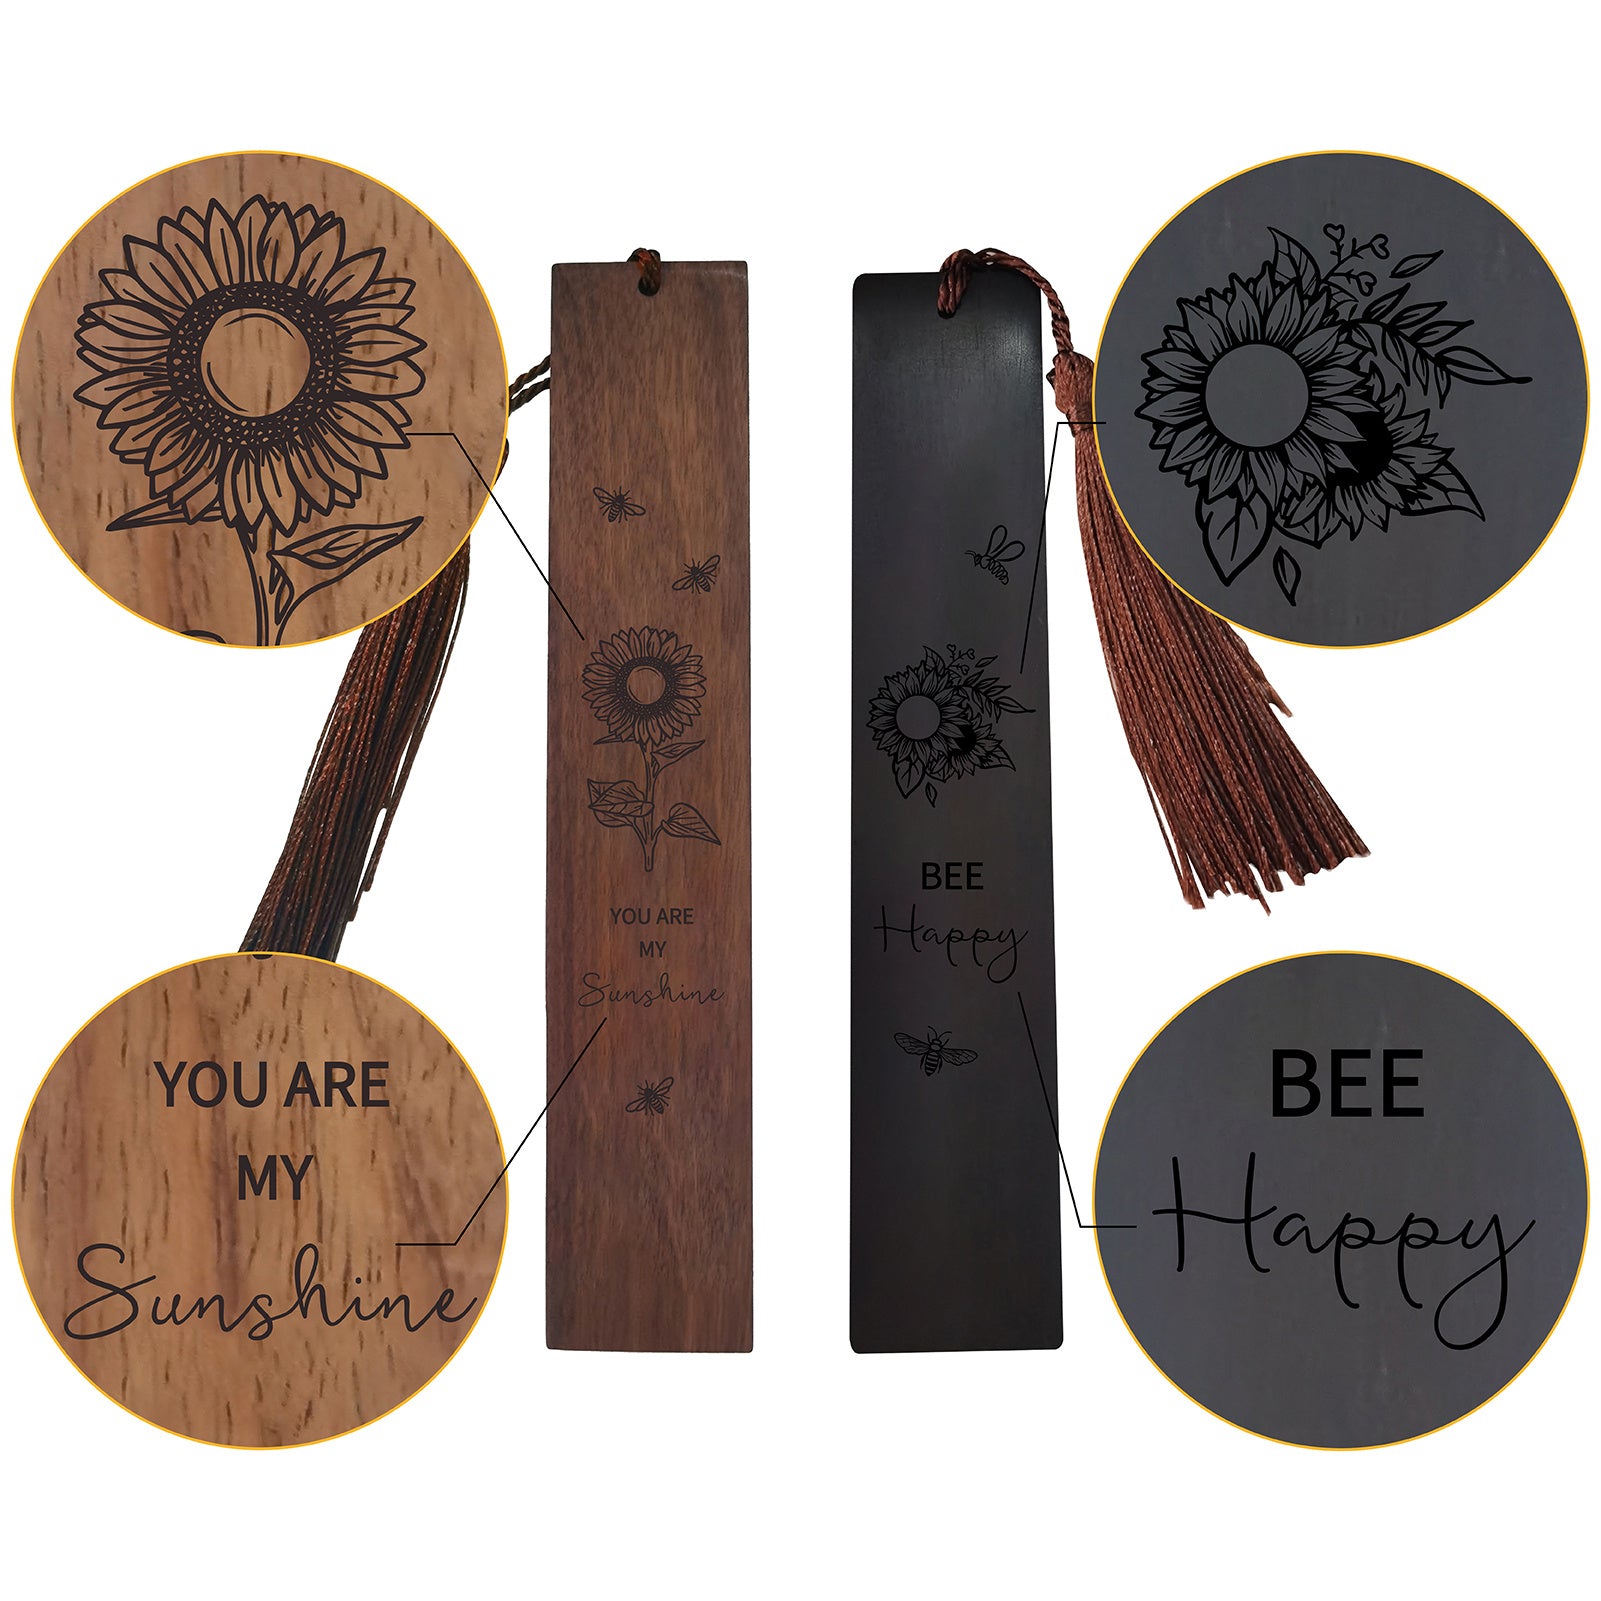 CRASPIRE 1 set Rosewood & African Blackwood Bookmarks Set, Laser Engraving, Rectangle with Word Your Are My Sunshine & Bee Happy, Sunflower Pattern, 148x25mm, 2pcs/set